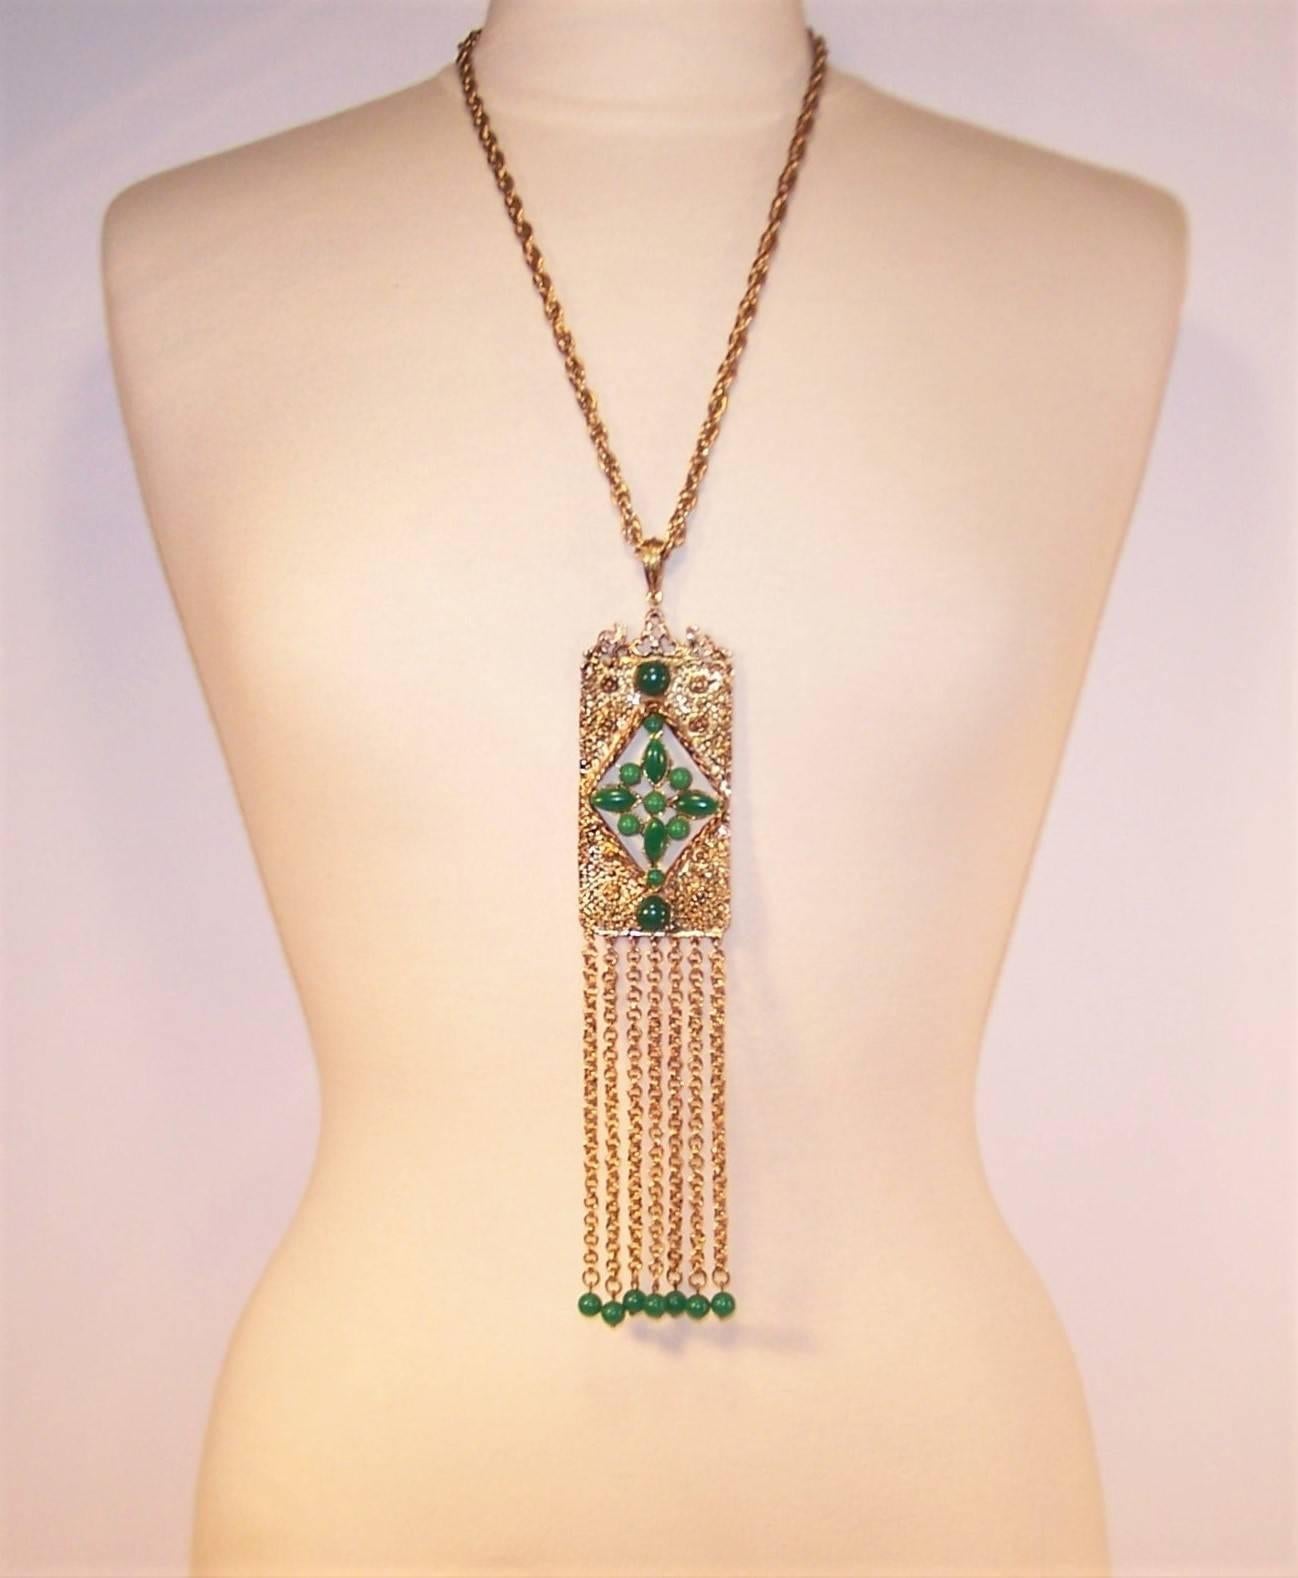 This 1970's etruscan revival medallion necklace makes a statement and compliments bohemian styles.  The rectangular 4" x 1.88" gold tone metal medallion has a brutalist finish that on close inspection resembles spider webs and abstract